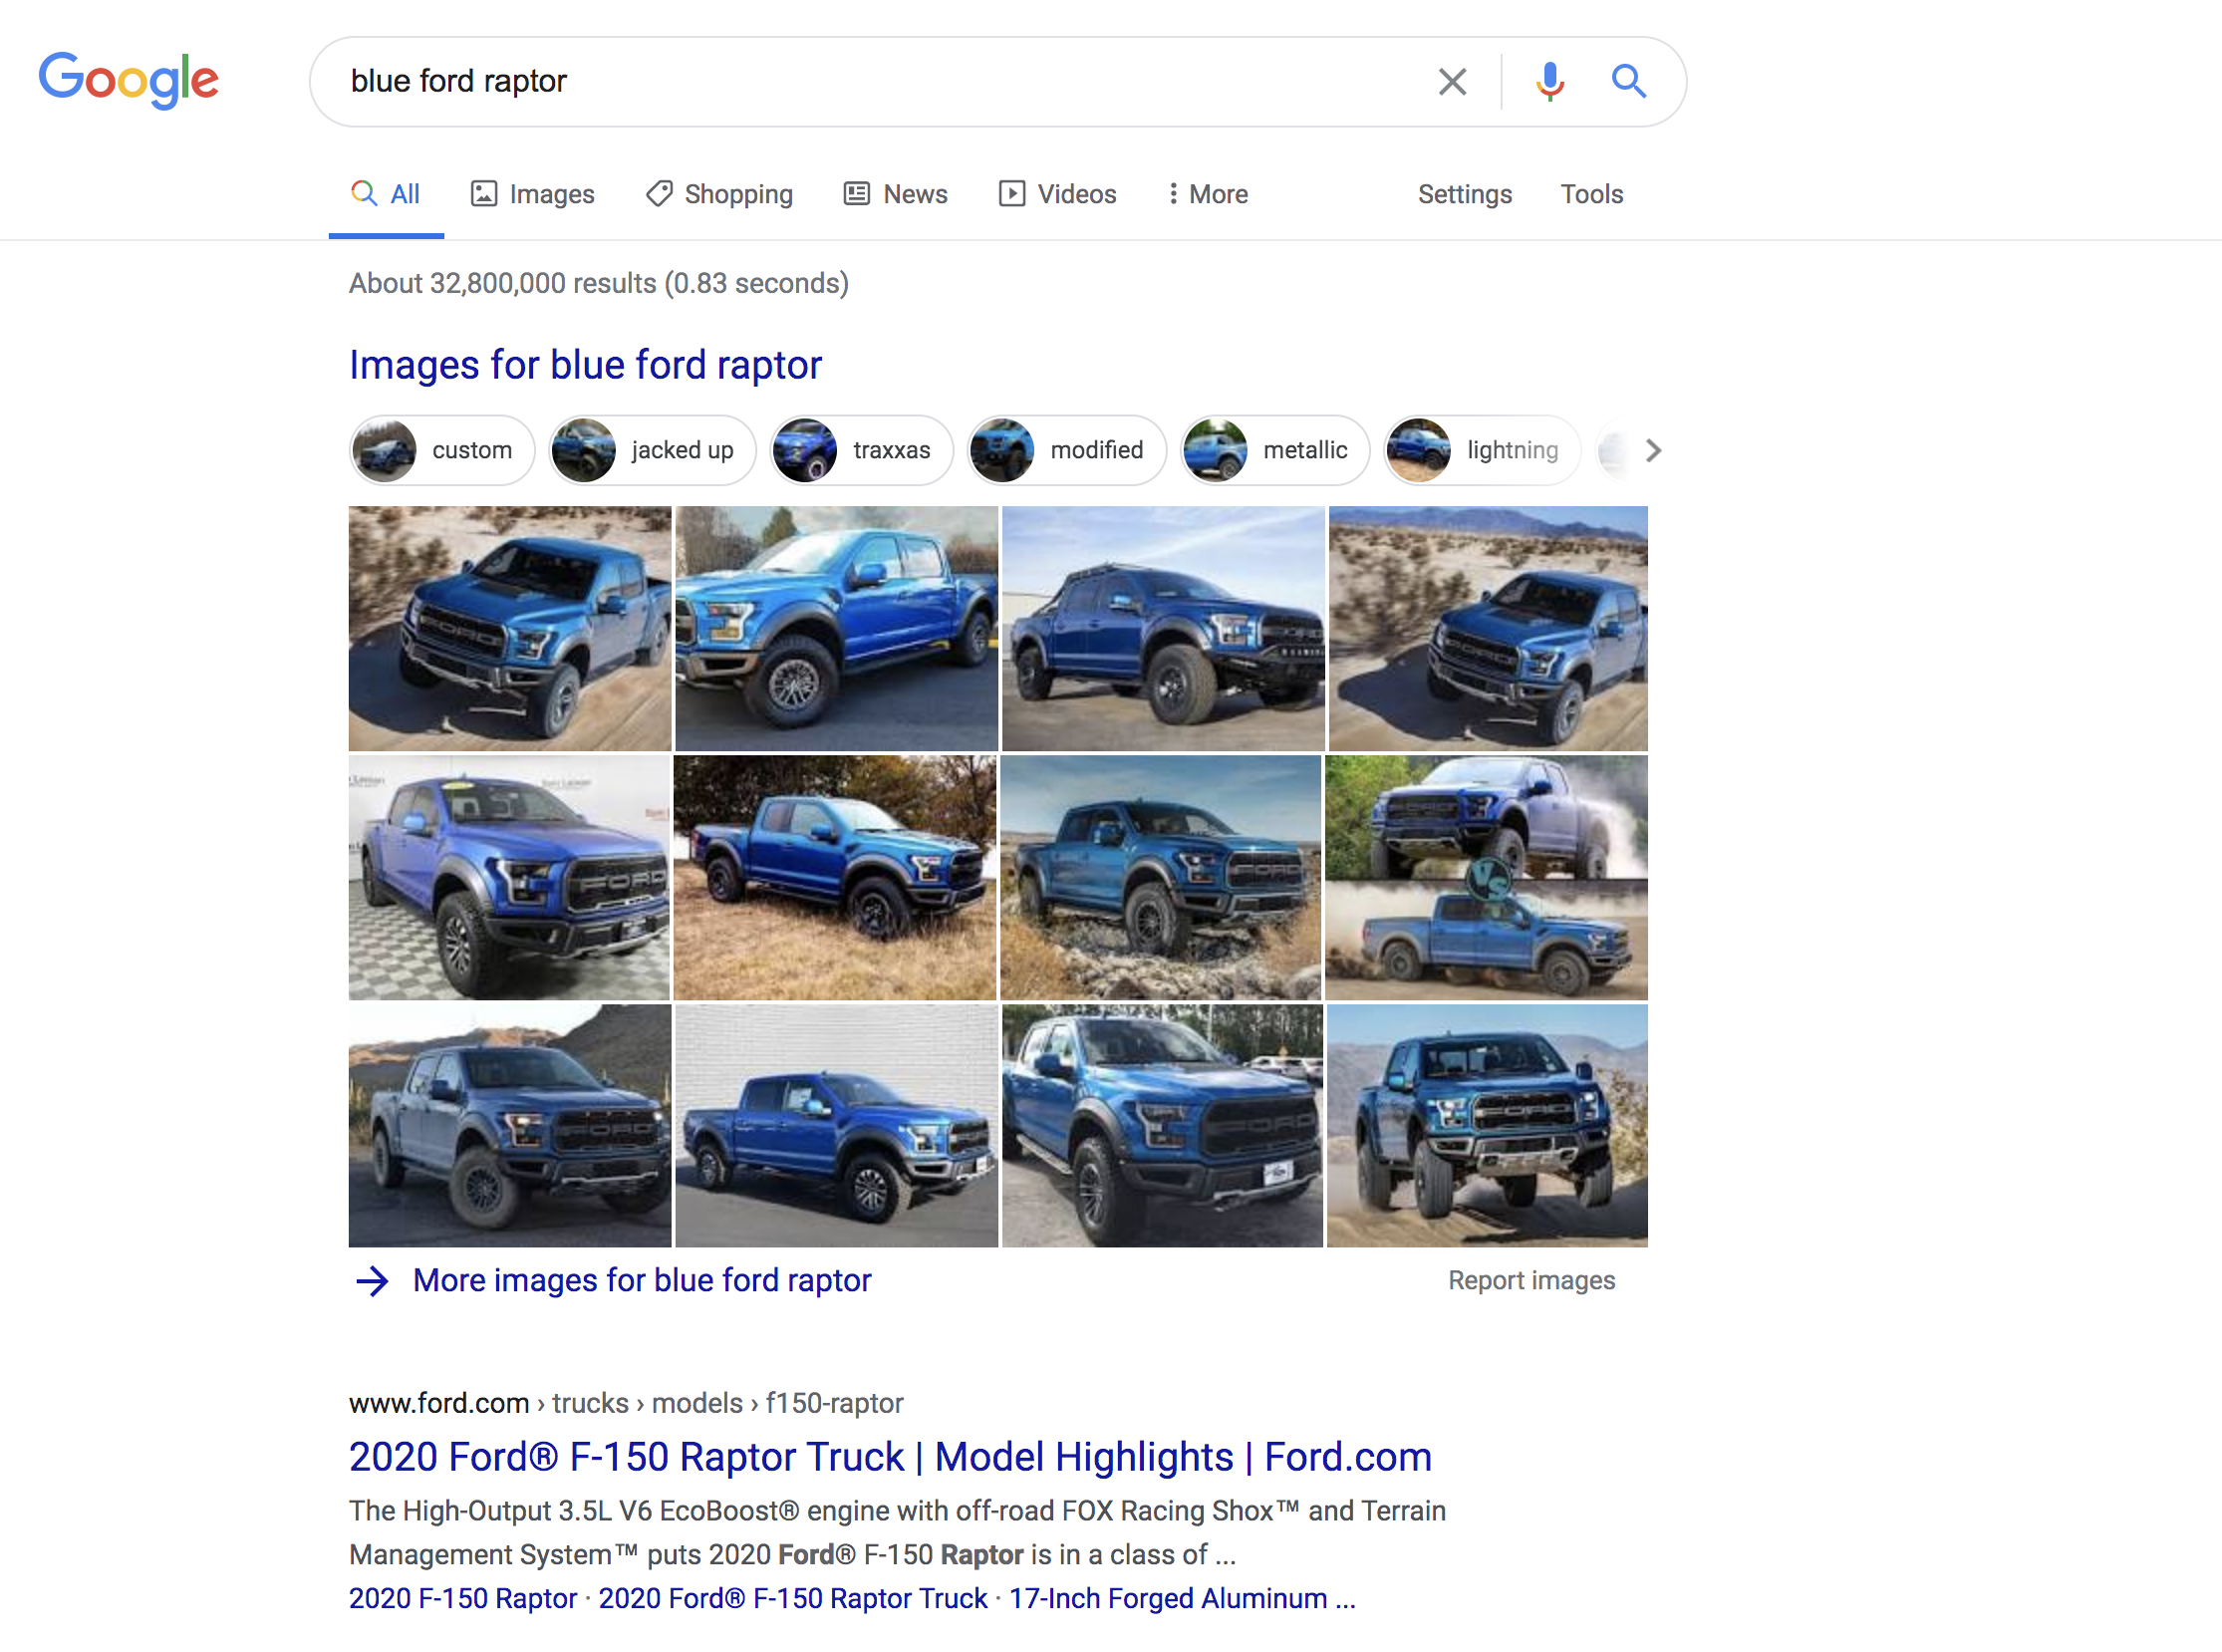 blue Ford Raptor image search results